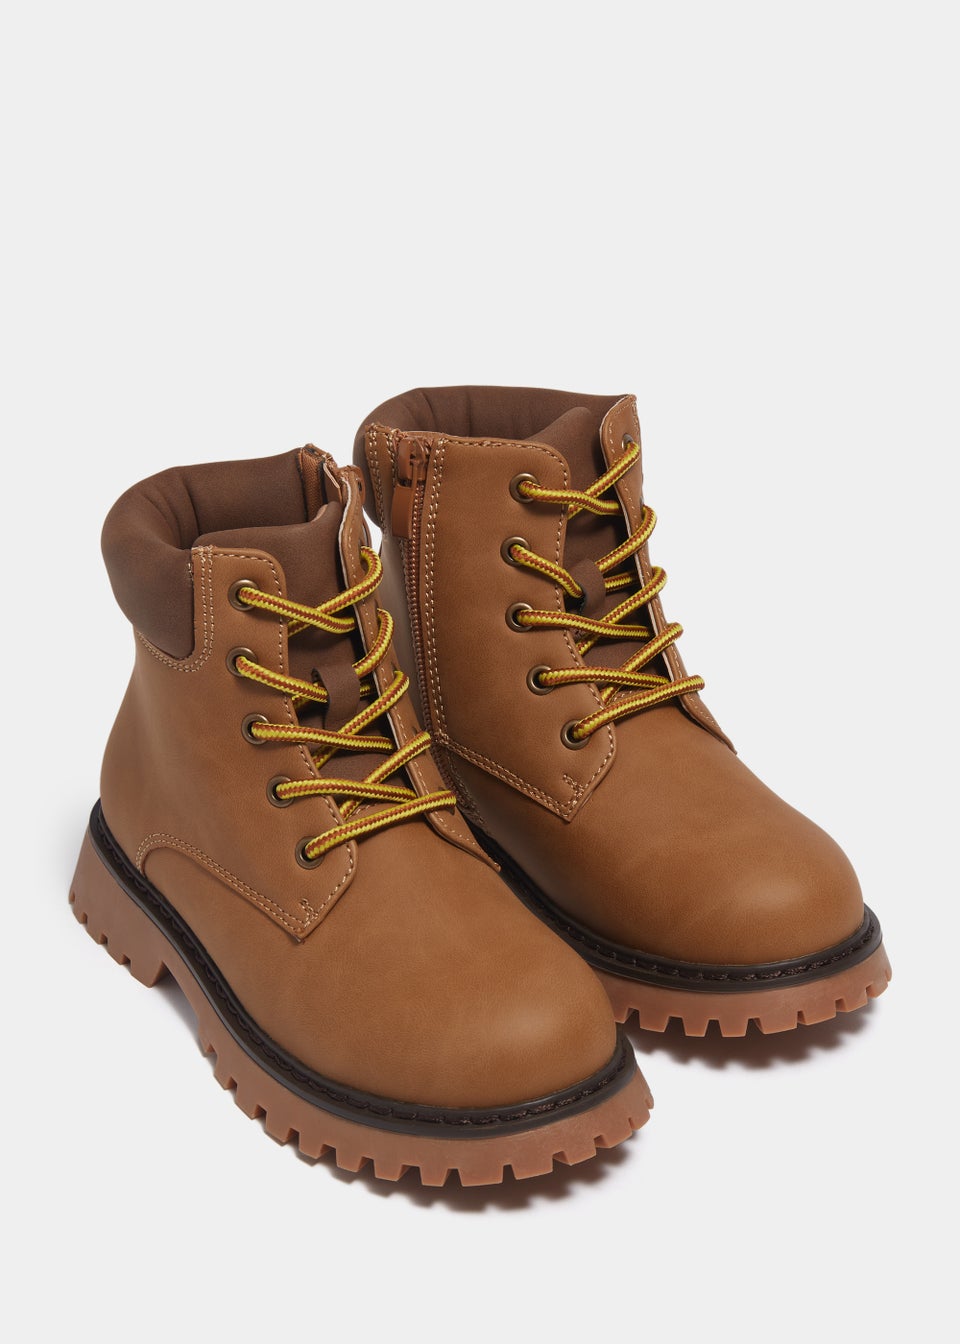 Boys Tan Lace Up Hiker Boots (Younger 10-Older 6)